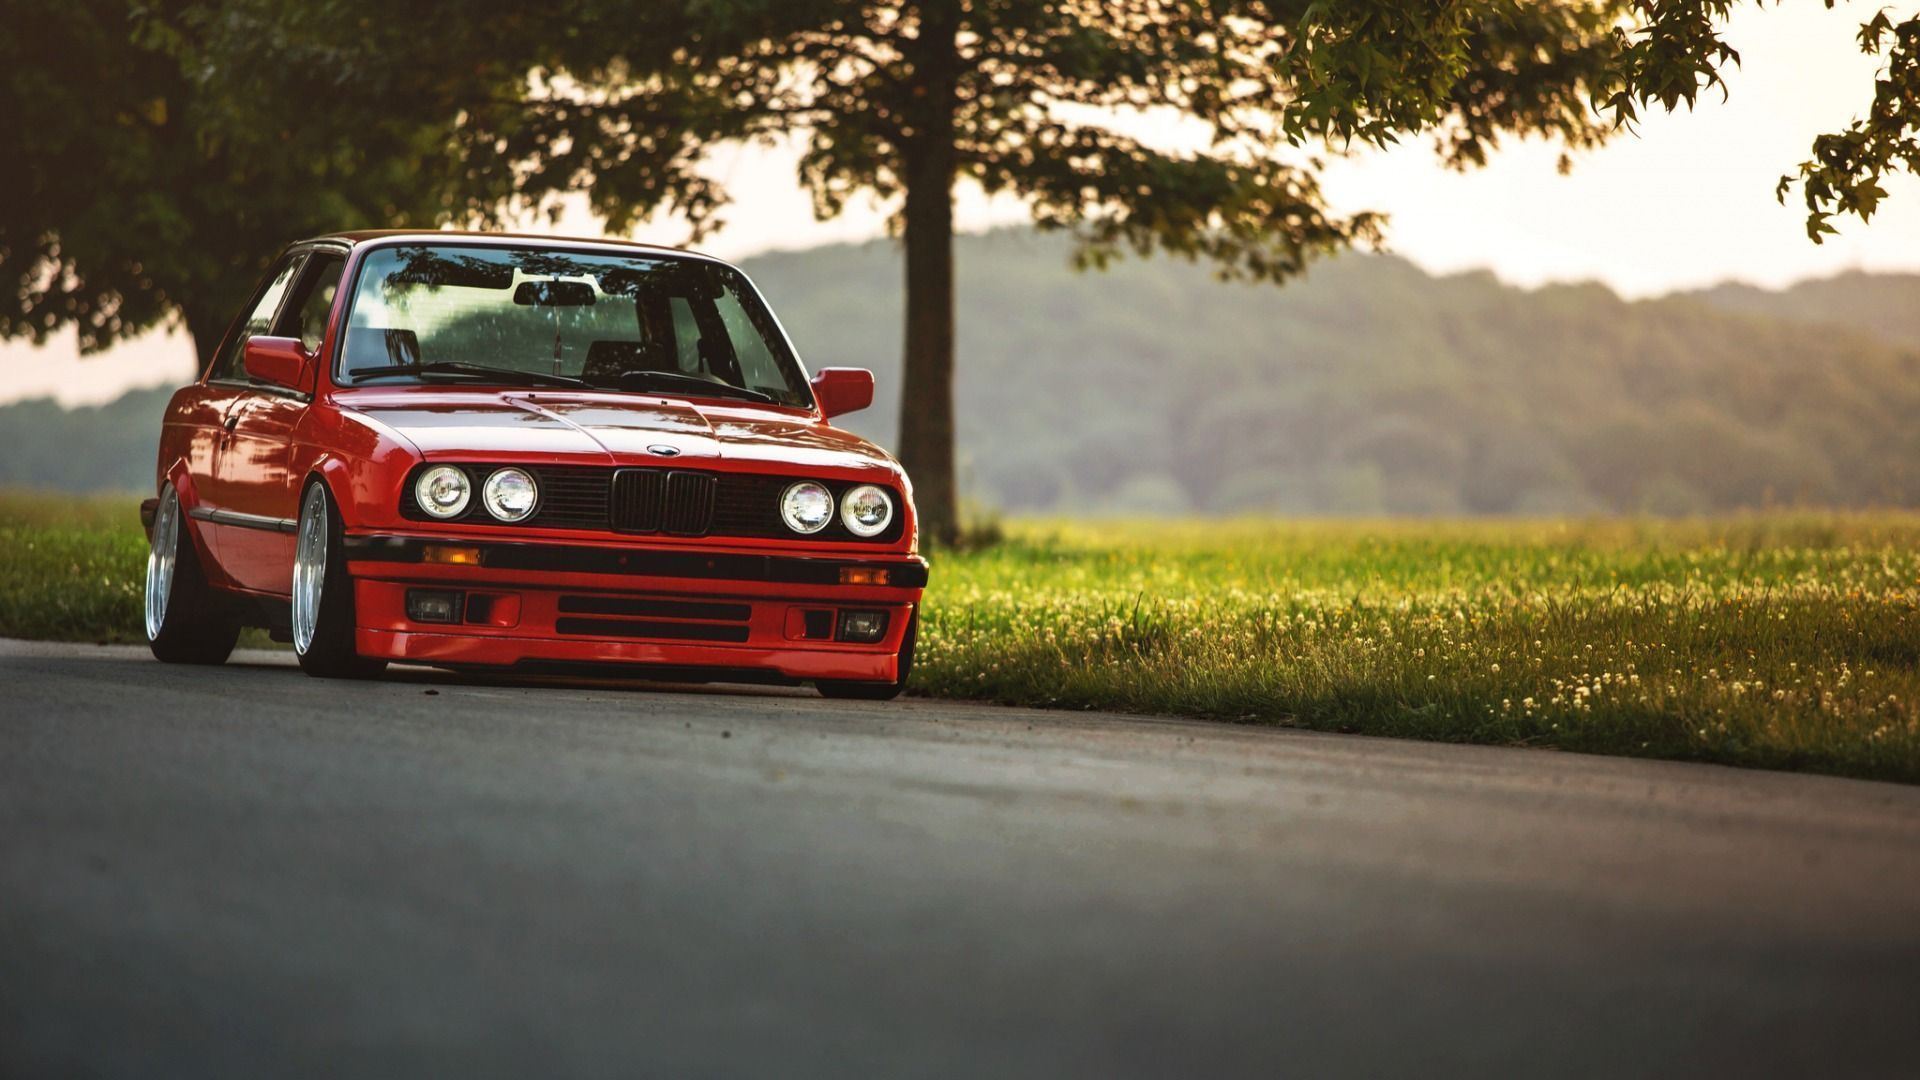 Bmw E30 Pictures  Download Free Images on Unsplash